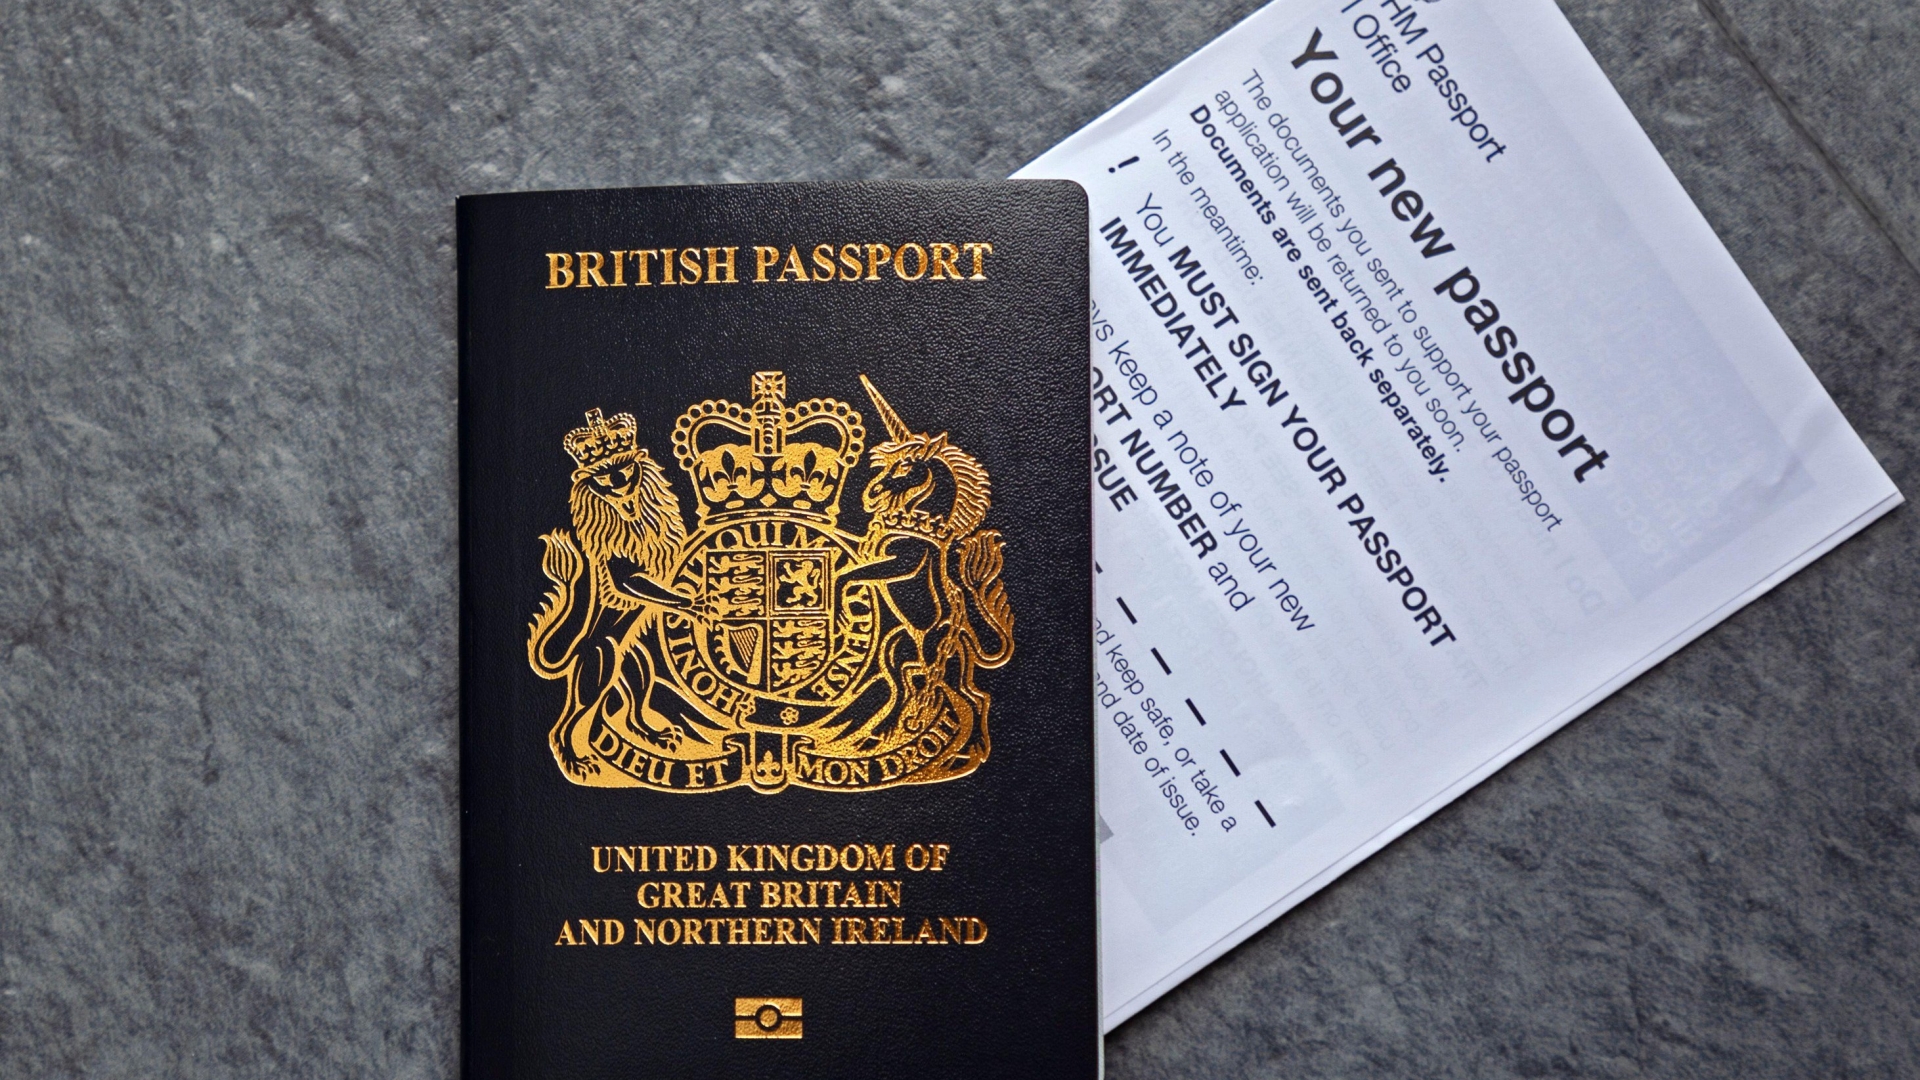 French centre blamed for UK passport delays gets £10m in taxpayer cash